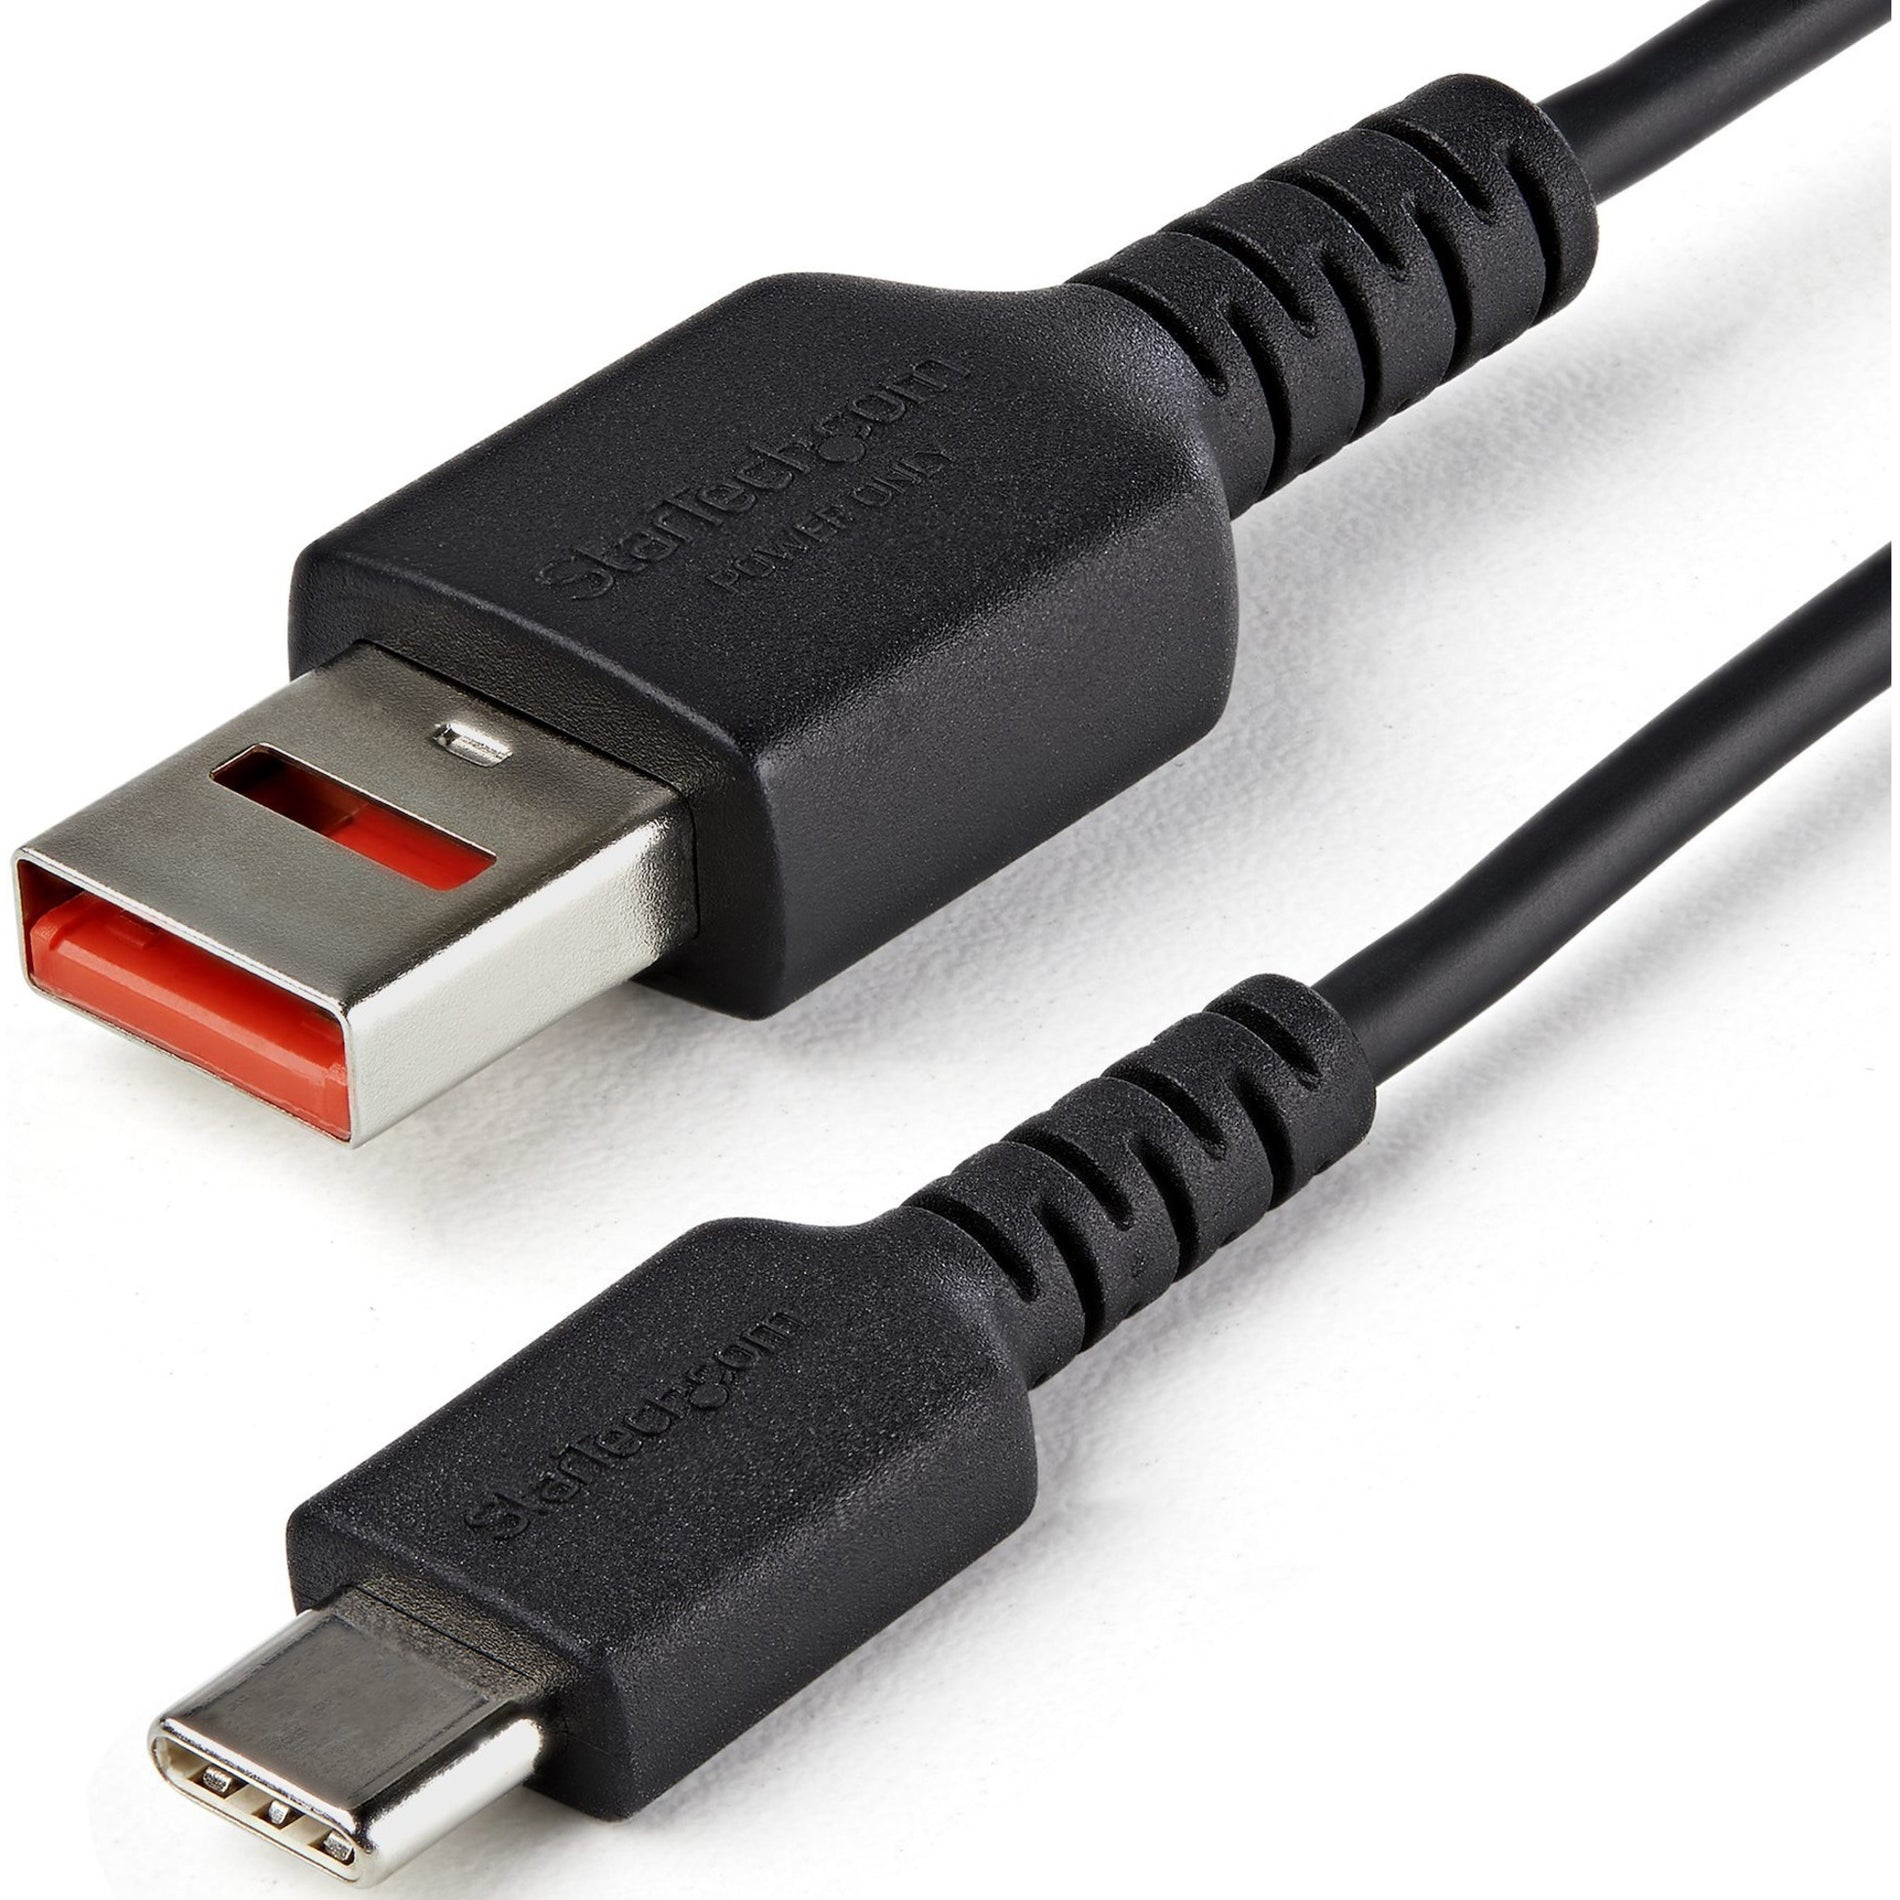 StarTech.com USBSCHAC1M USB/USB-C Data Transfer Cable, 3ft (1m) Secure Charging Cable, Charge-Only Cable for Phone/Tablet